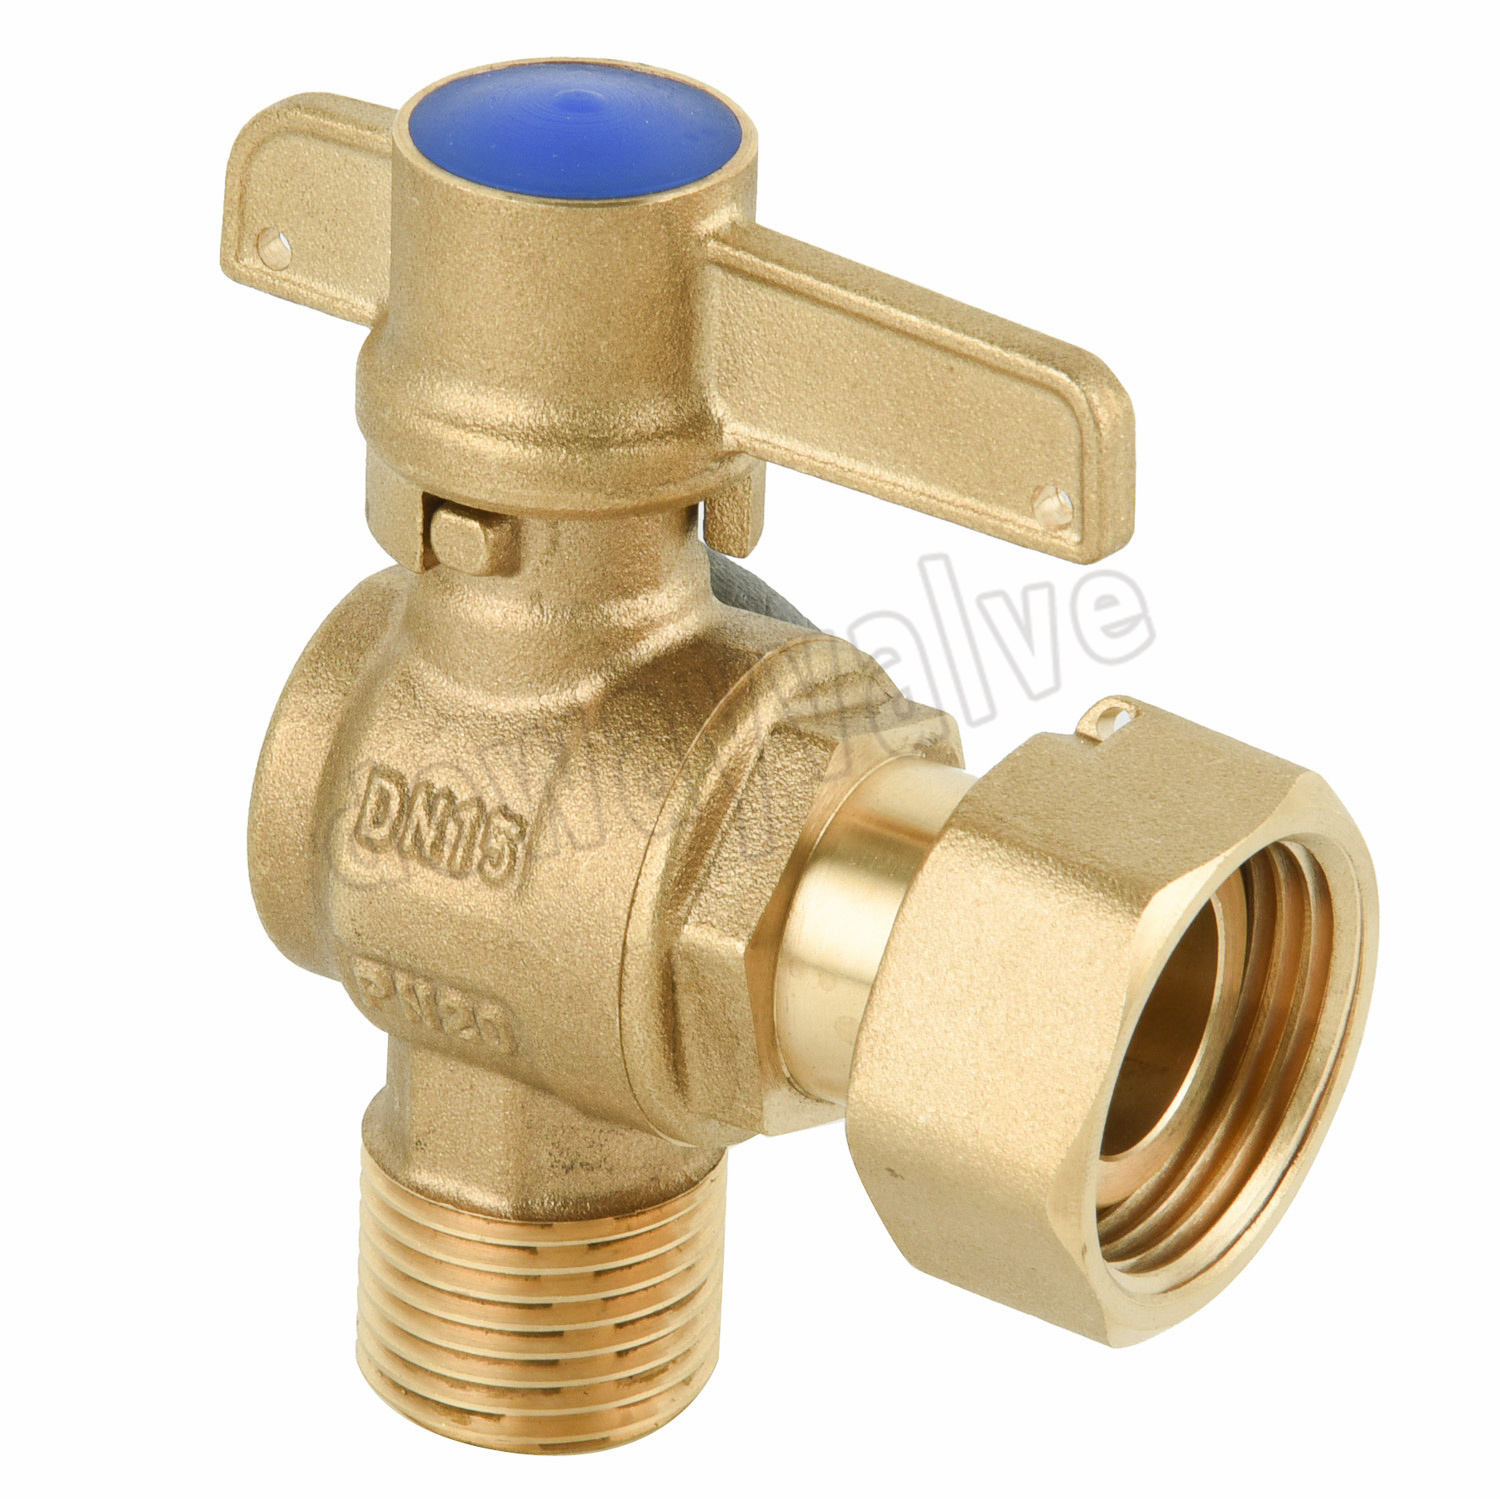 Acs Approval Angle Type Female Lockable Water Meter Ball Valve PE25 China Factory